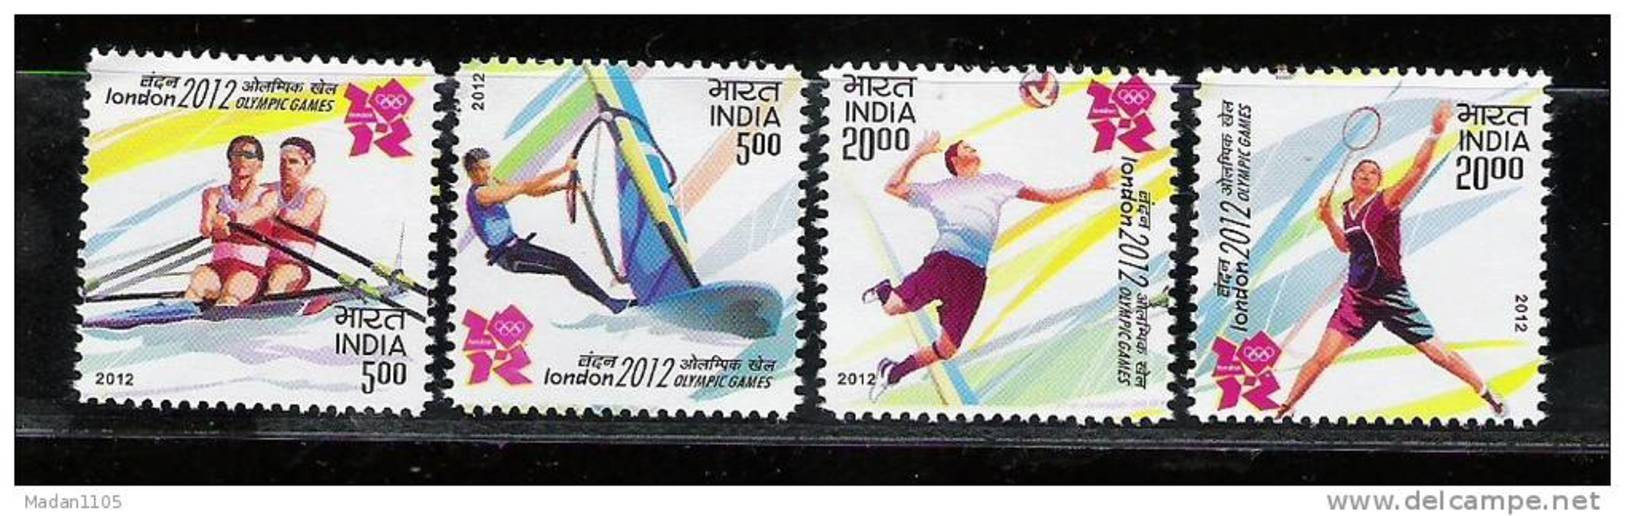 INDIA 2012  Olympic Games, LOT Of 10 Sets, Olympics, London . Sets Of 4 Stamps, MNH(**) - Sommer 2012: London